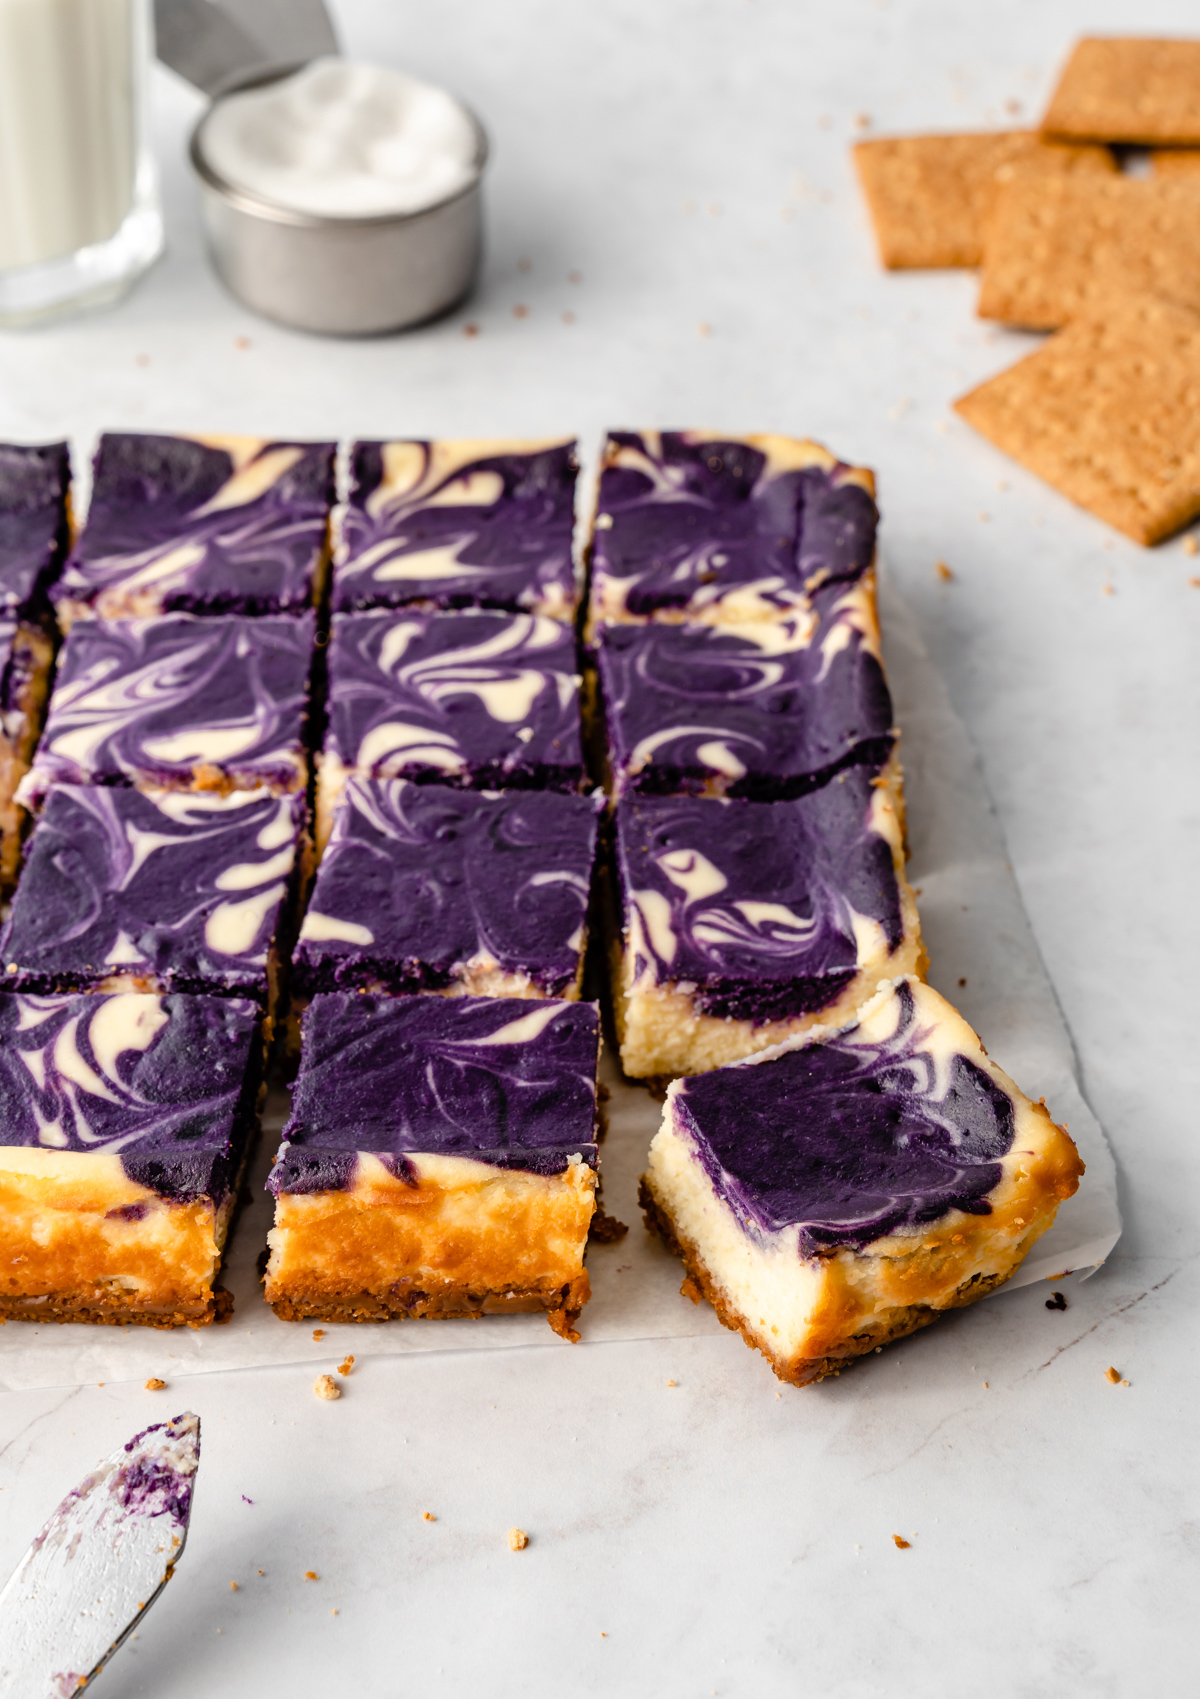 Ube cheesecake bars on parchment paper with glass of milk, cup of sugar, and knife.